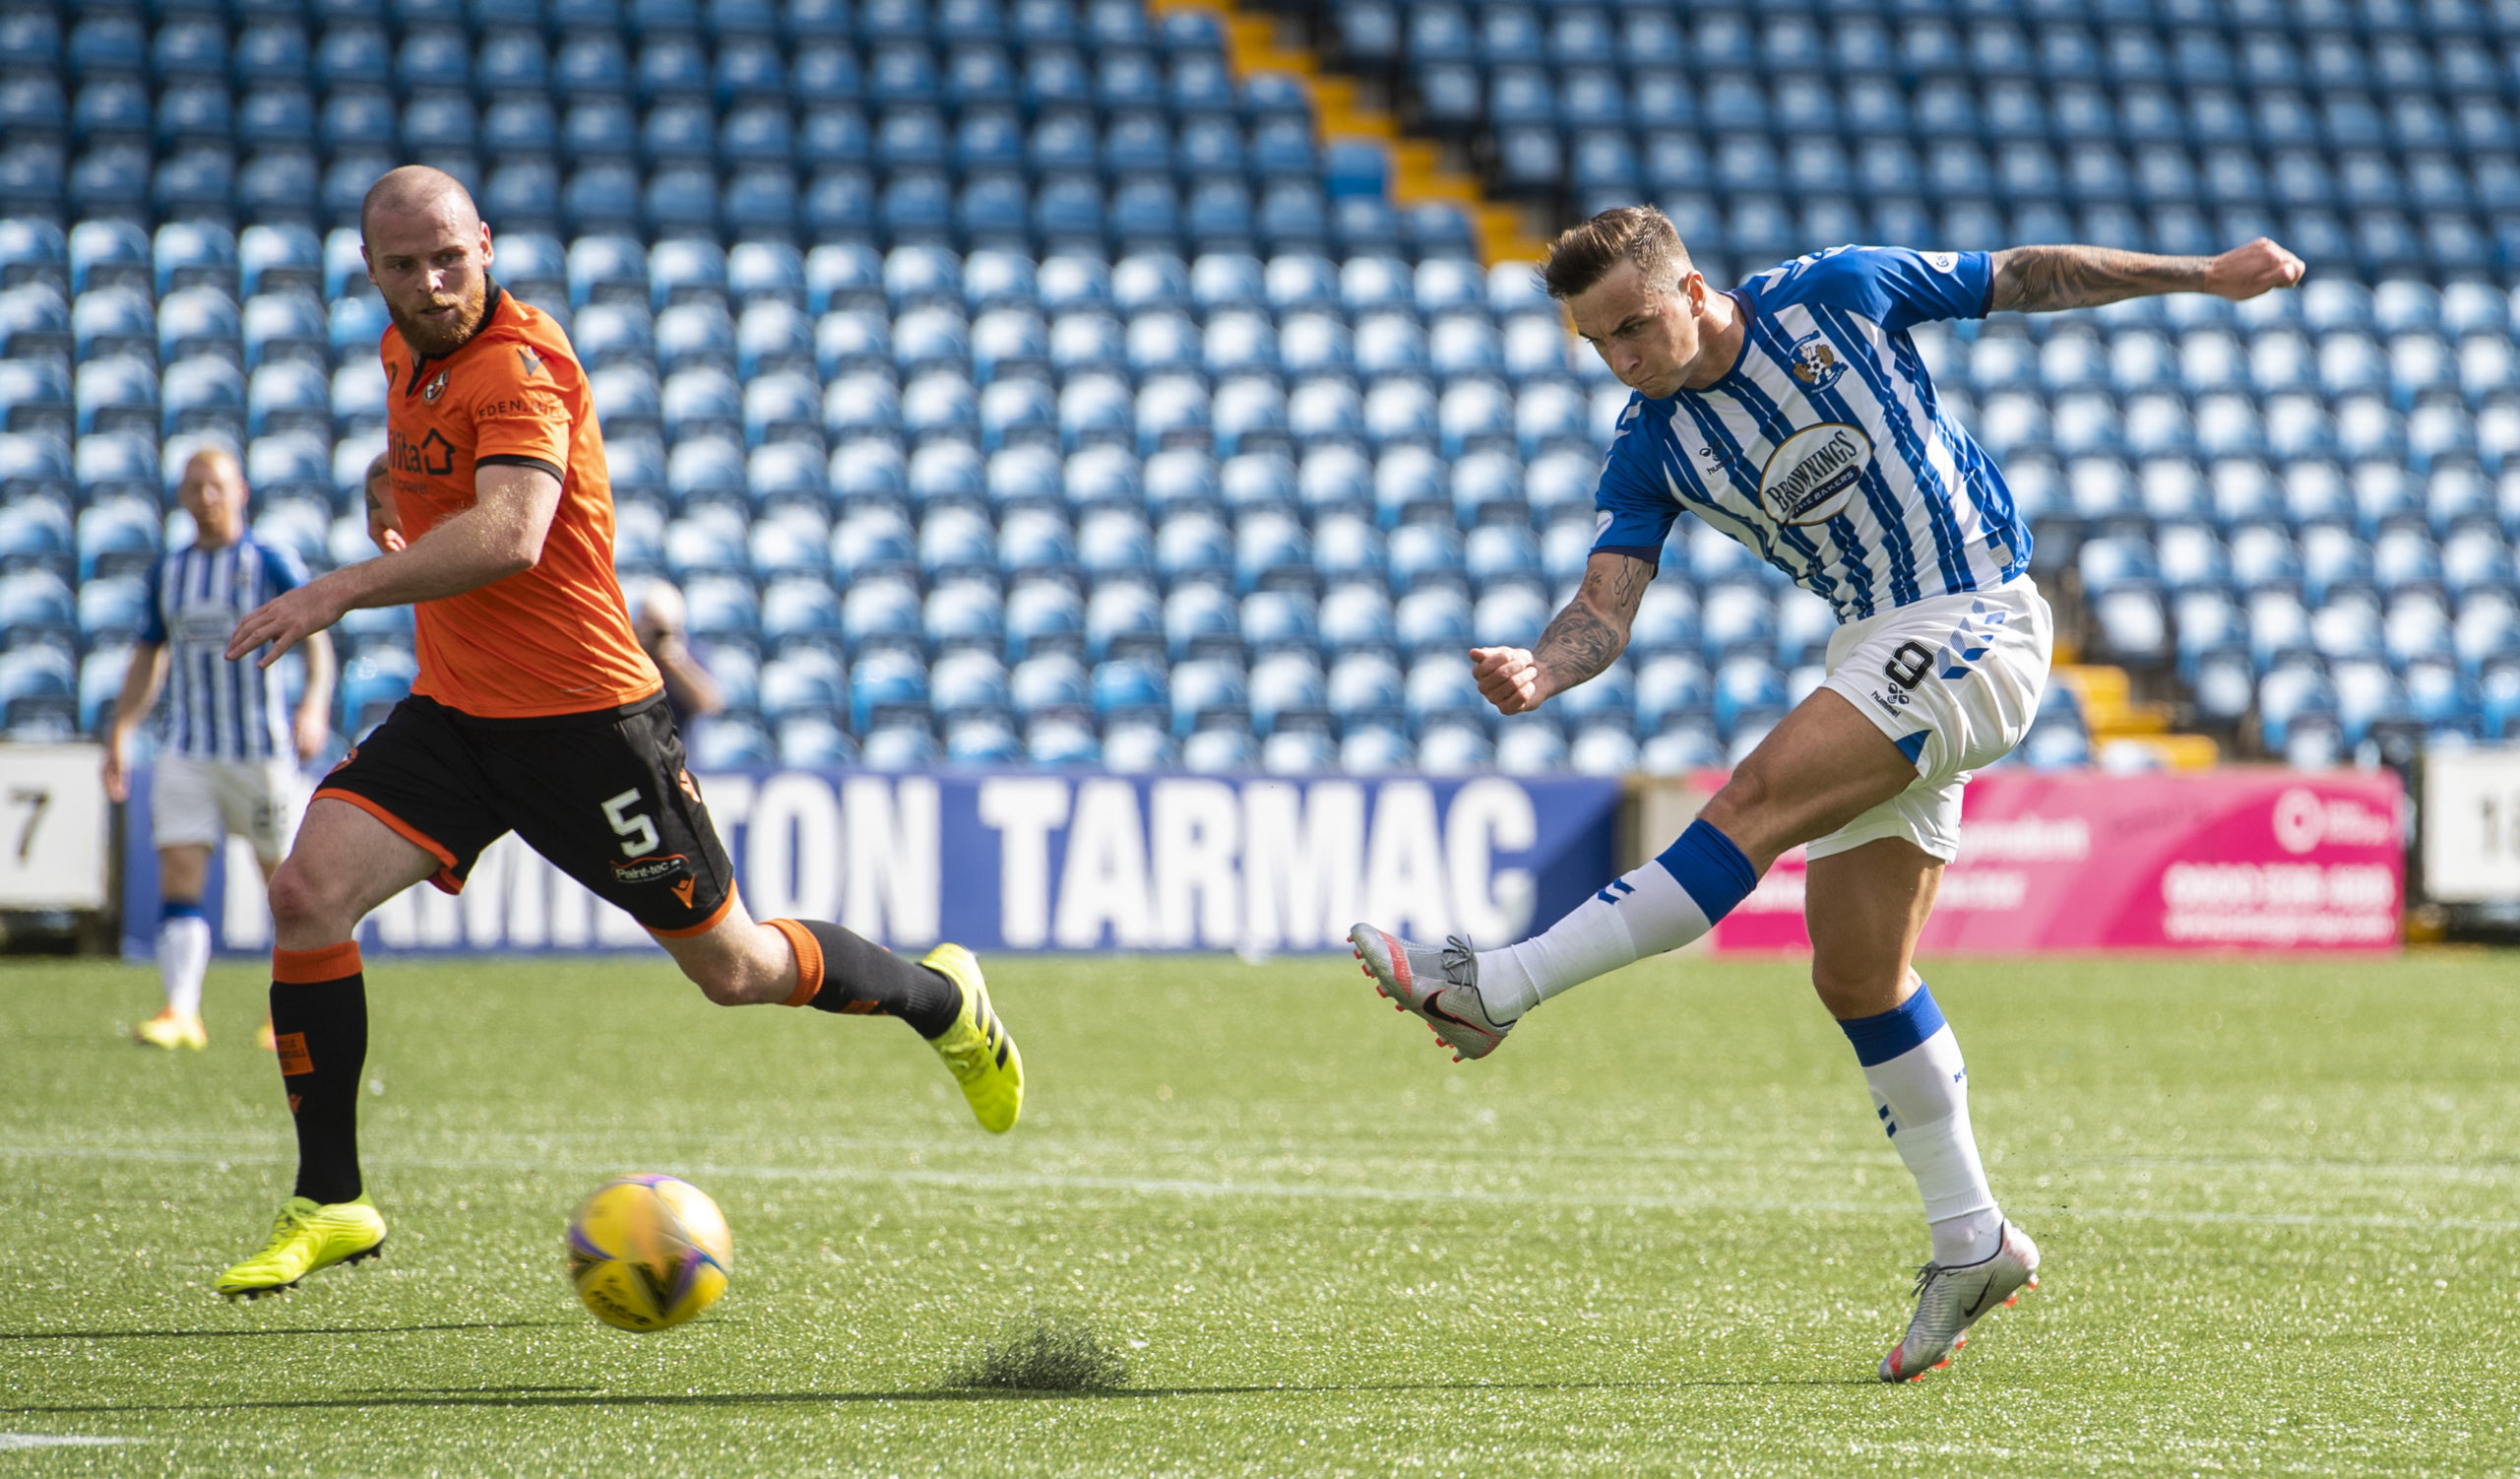 Eamonn Brophy makes it 2-0 to Kilmarnock against Dundee United.